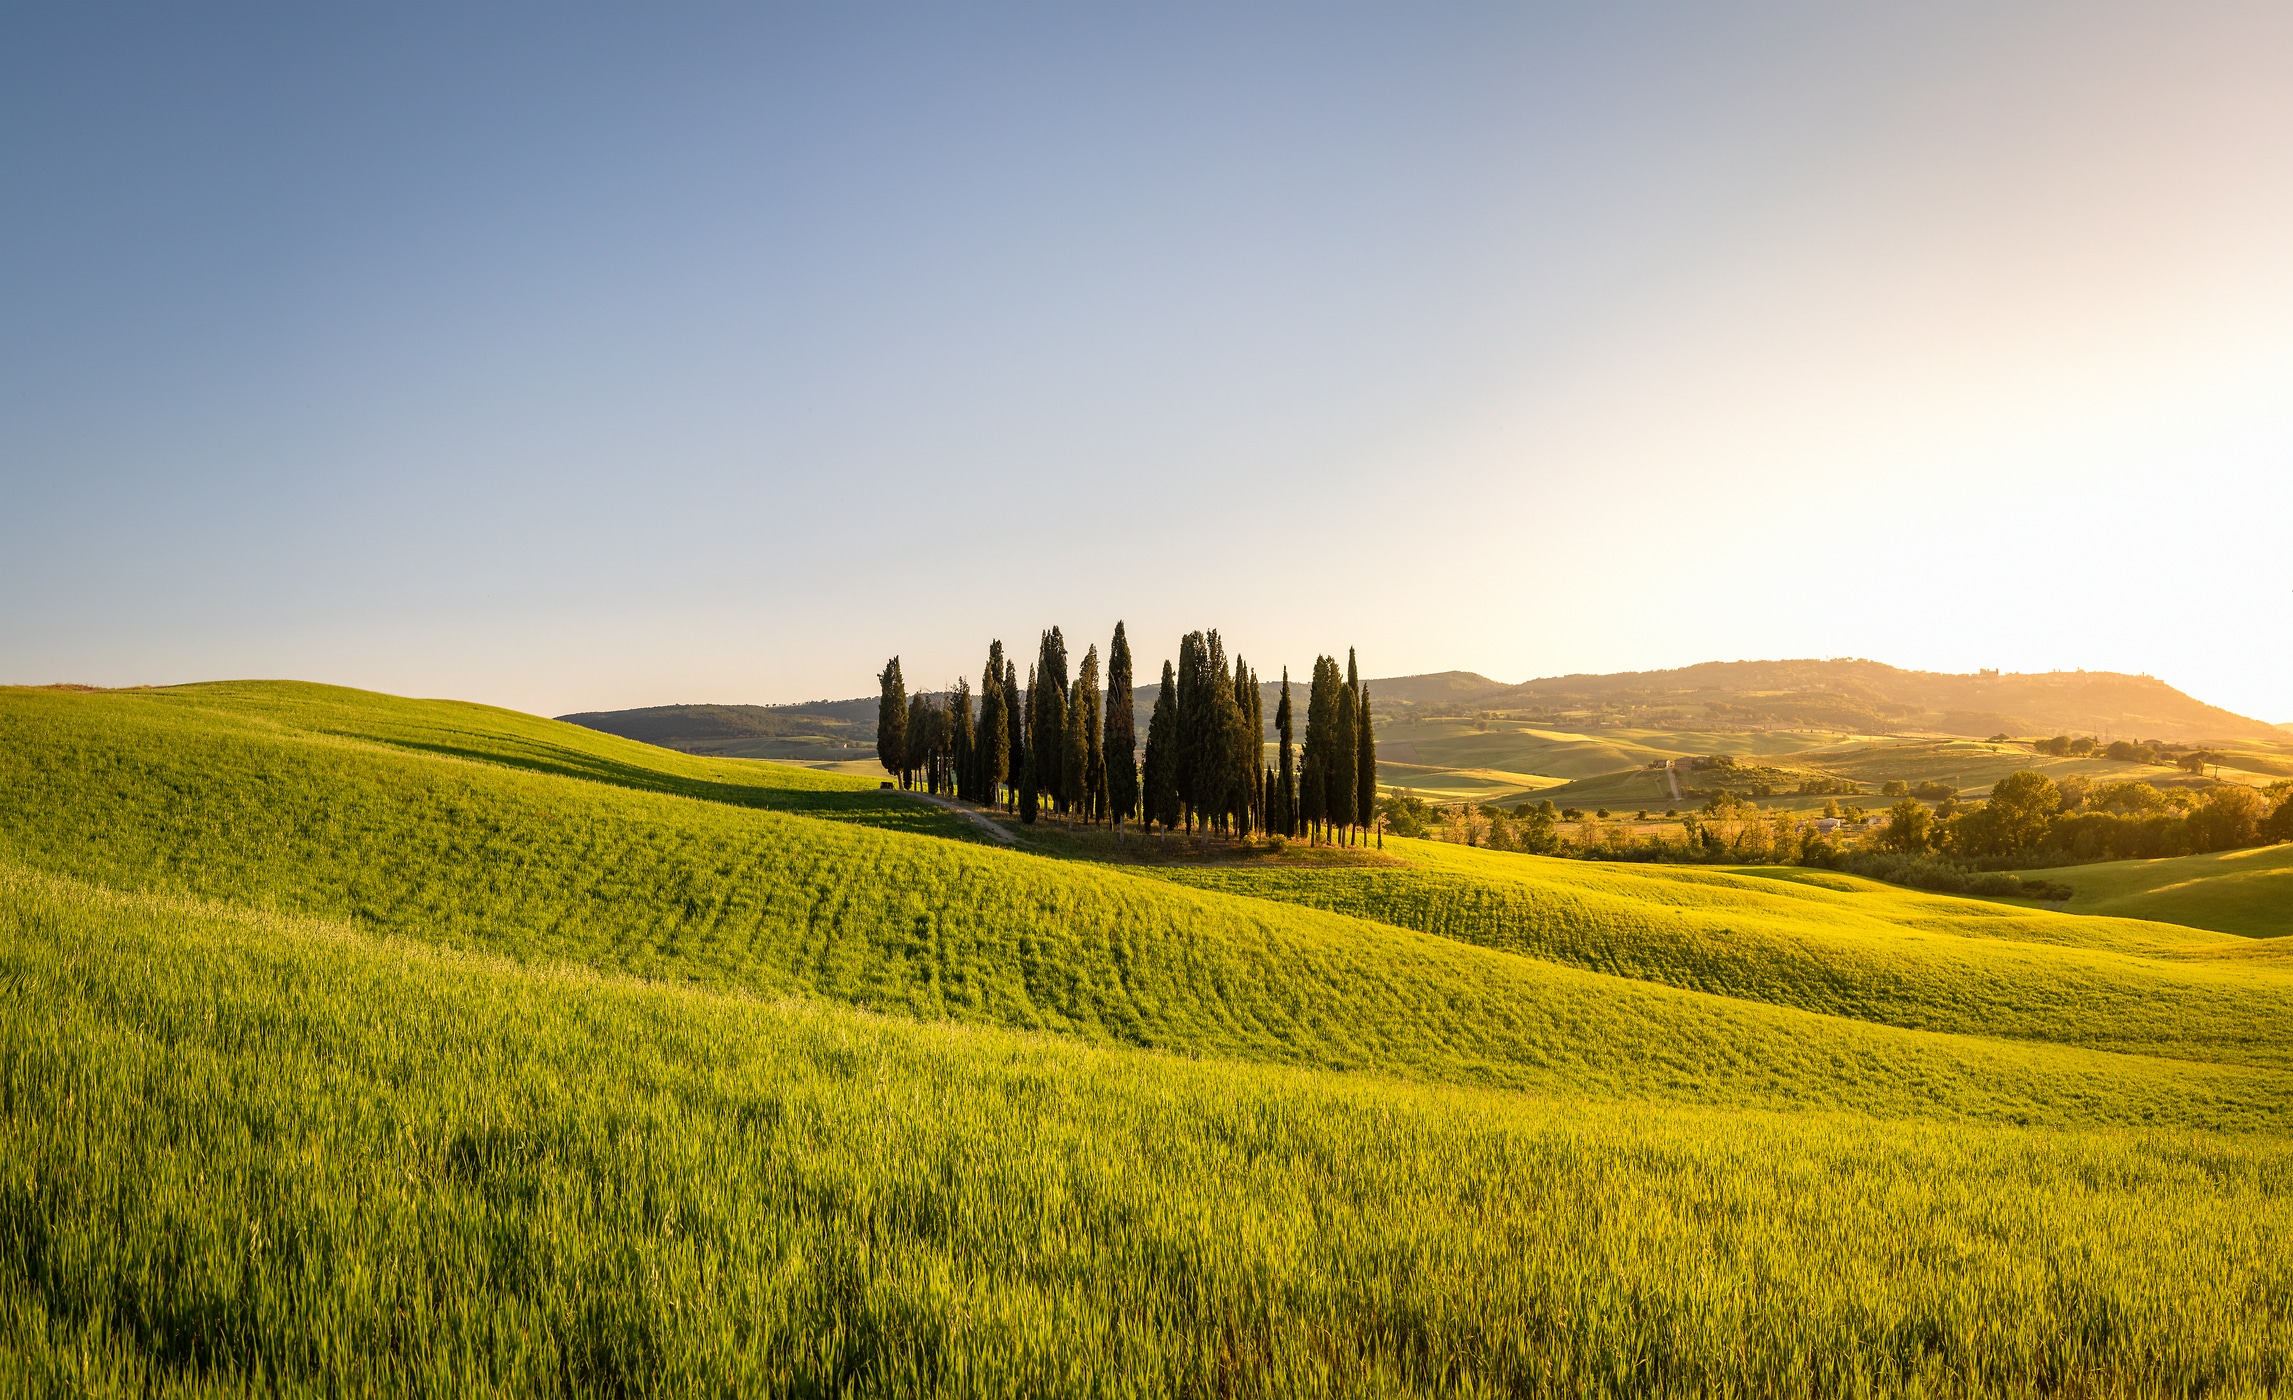 201 megapixels! A very high resolution, large-format VAST photo print of a landscape scene in Tuscany, Italy with cypress trees on a hill at sunset; art photograph created by Justin Katz in Cipressi di San Quirico d'Orcia, Tuscany, Italy